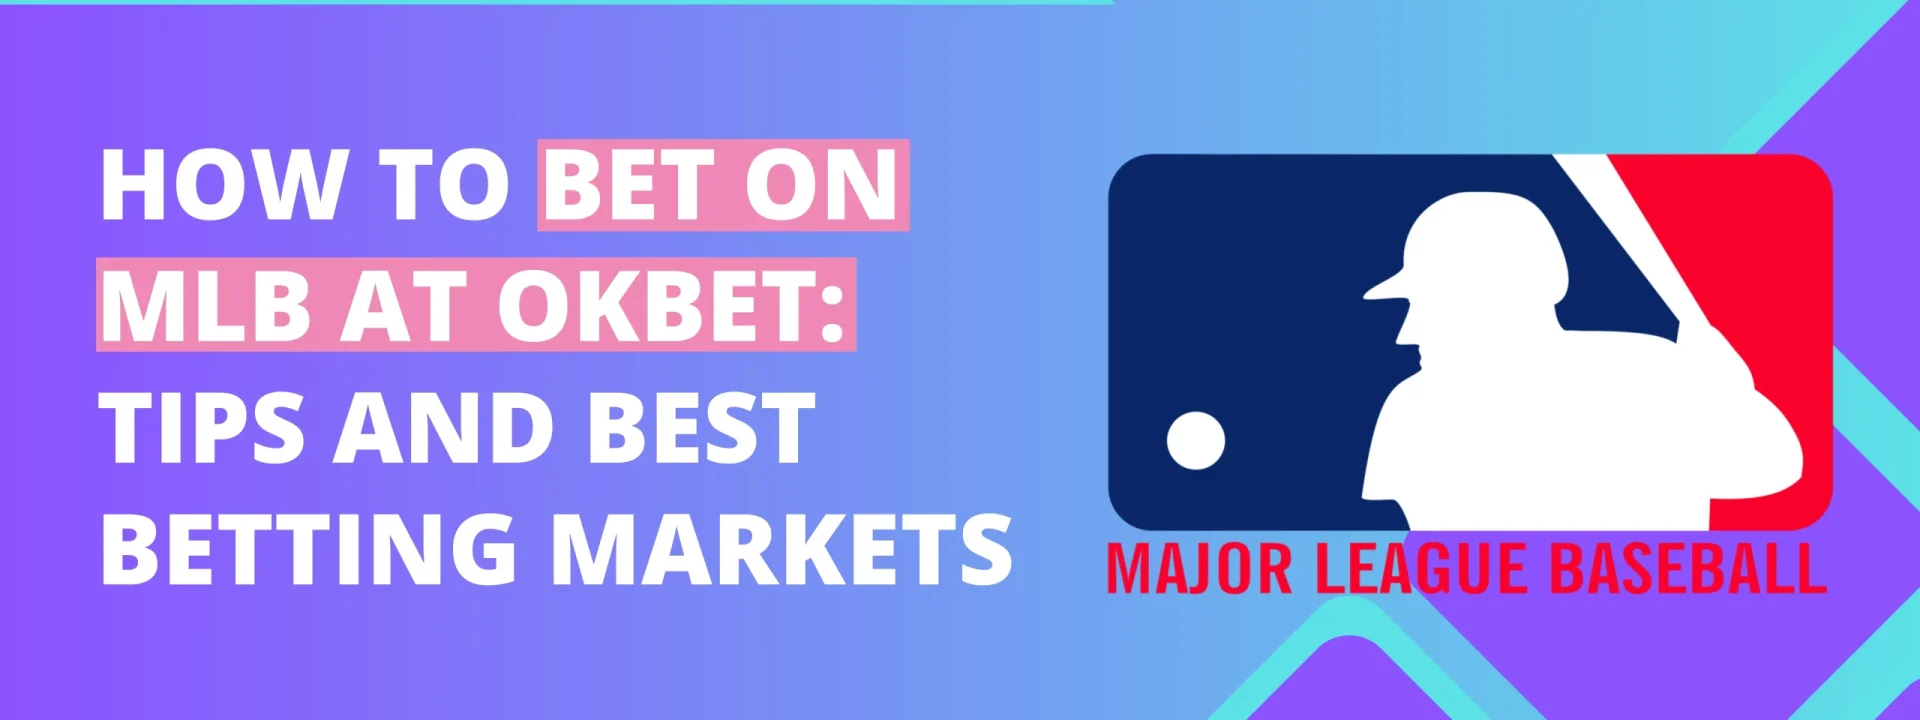 How to Bet on MLB at OKBet: Tips and Best Betting Markets